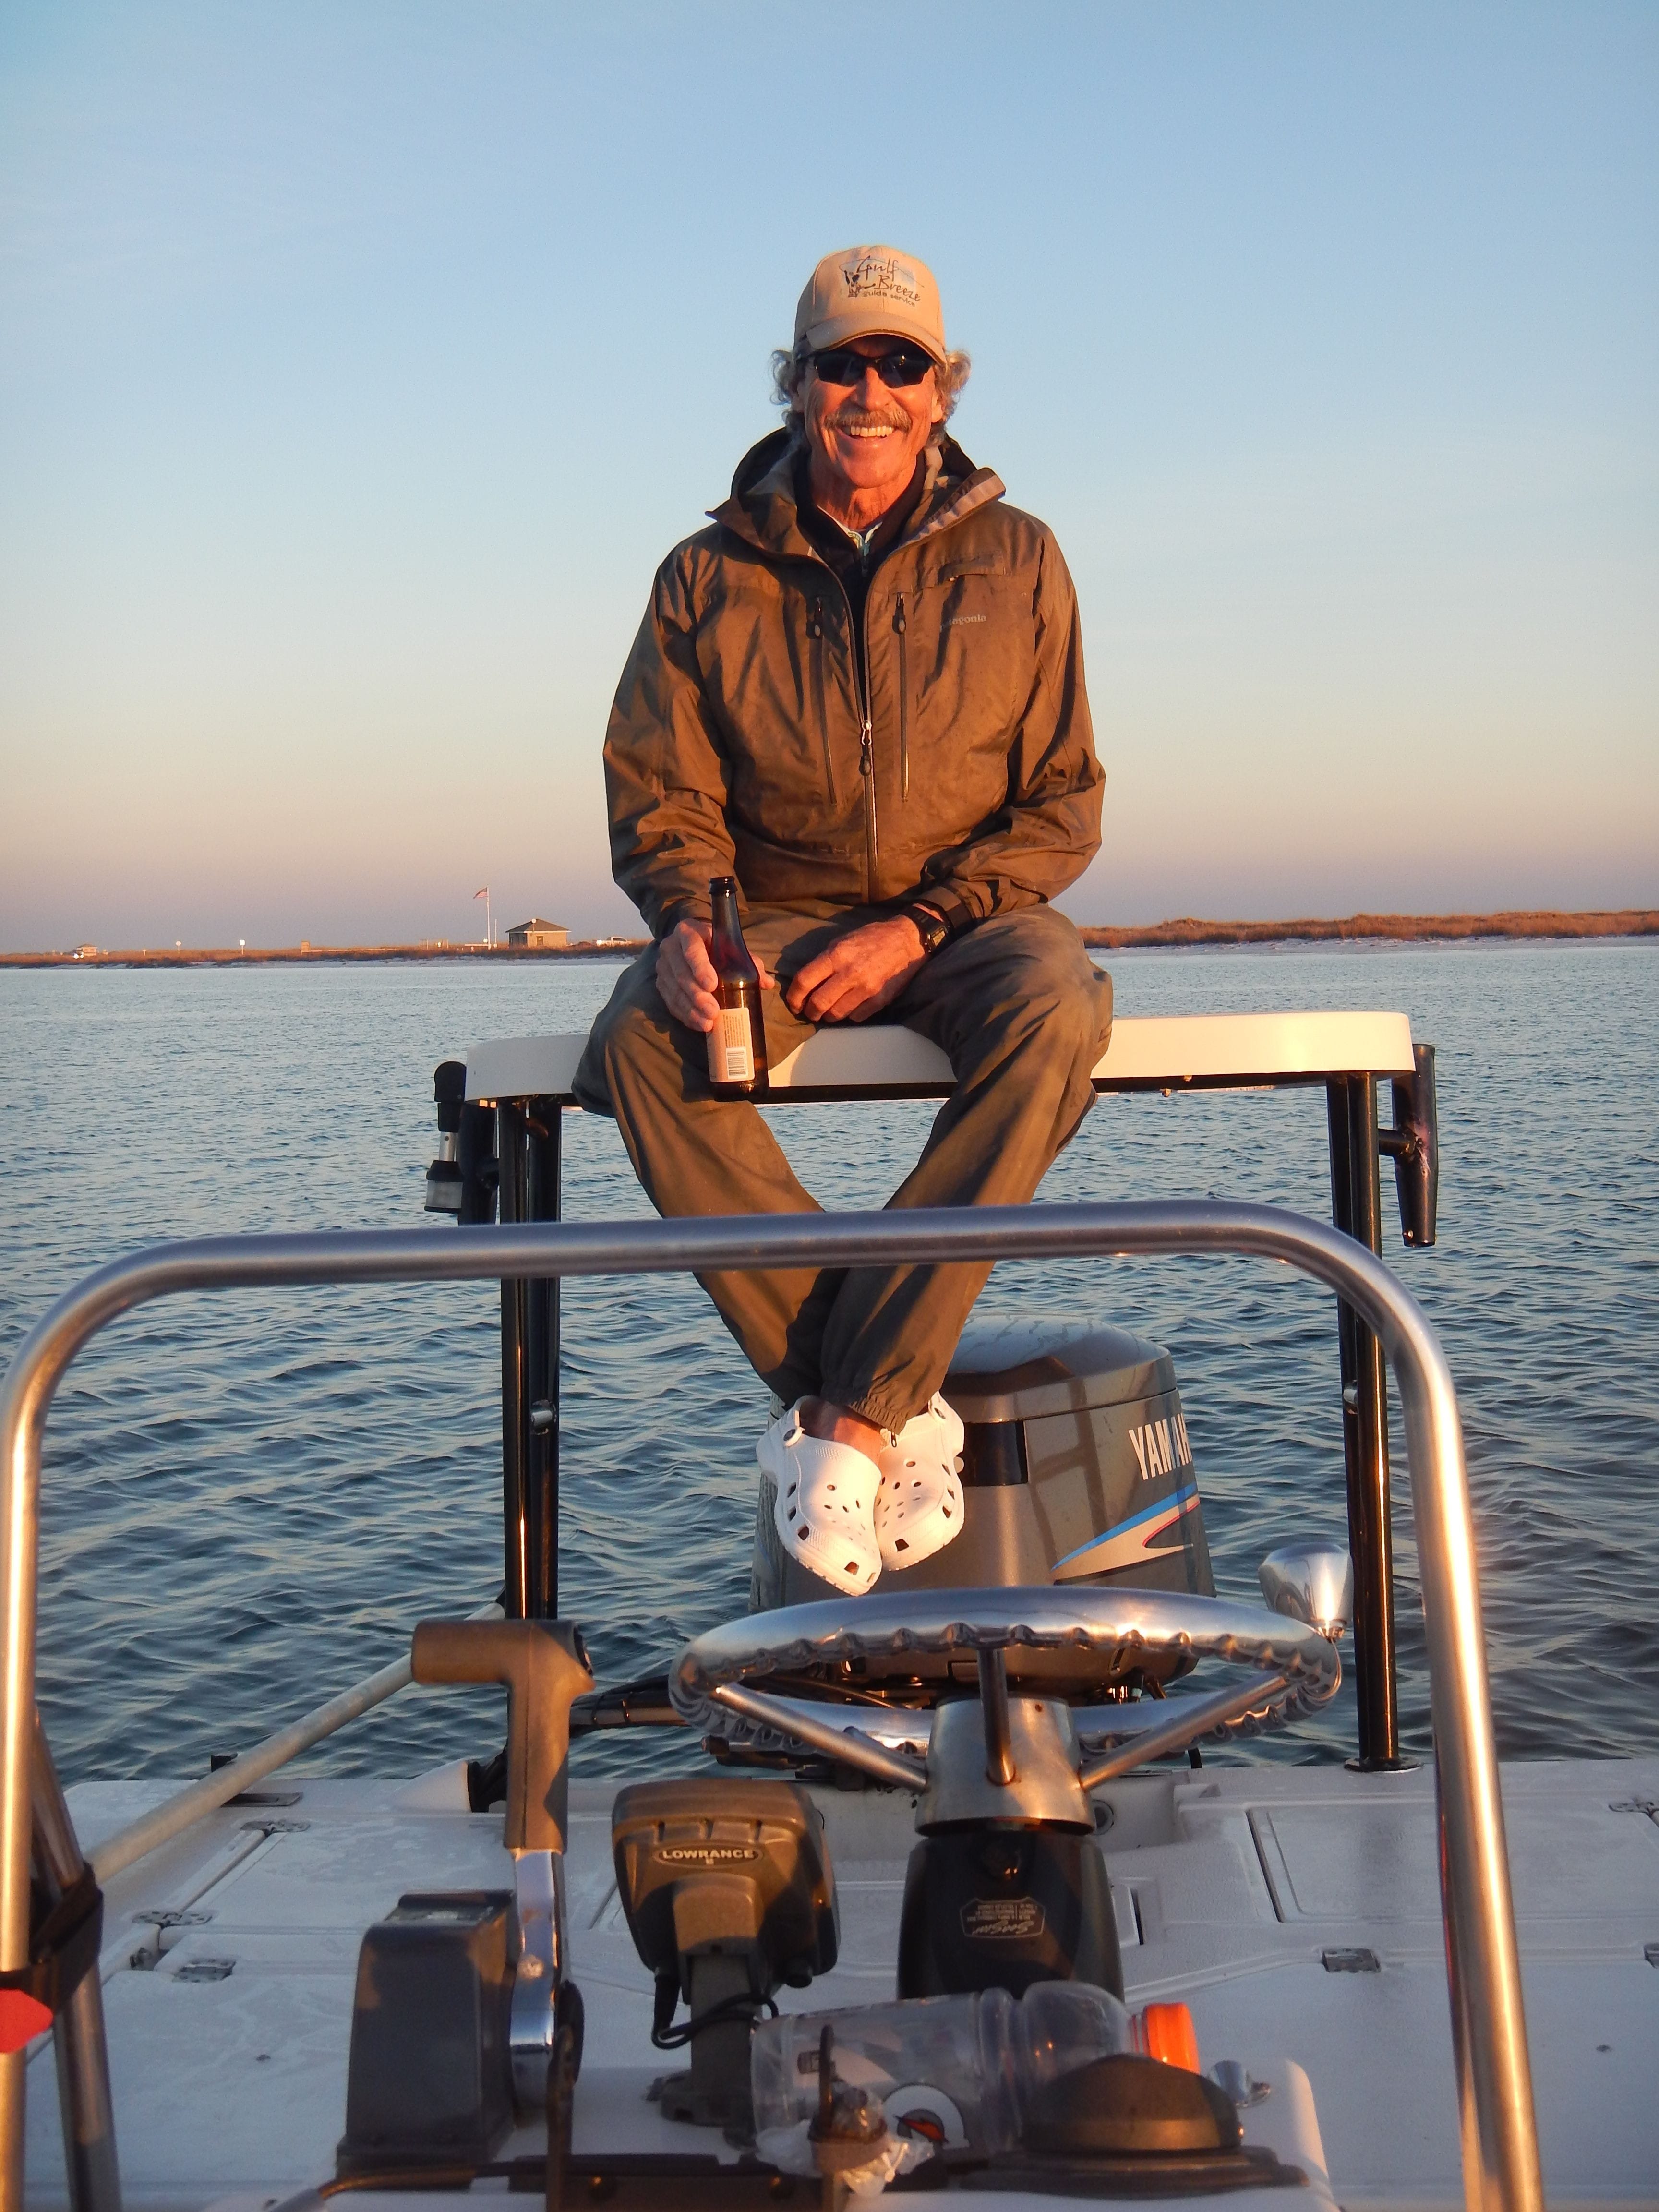 Captain relaxes on the boat at sunset. Entrance to Fort Pickens National Seashore in background.